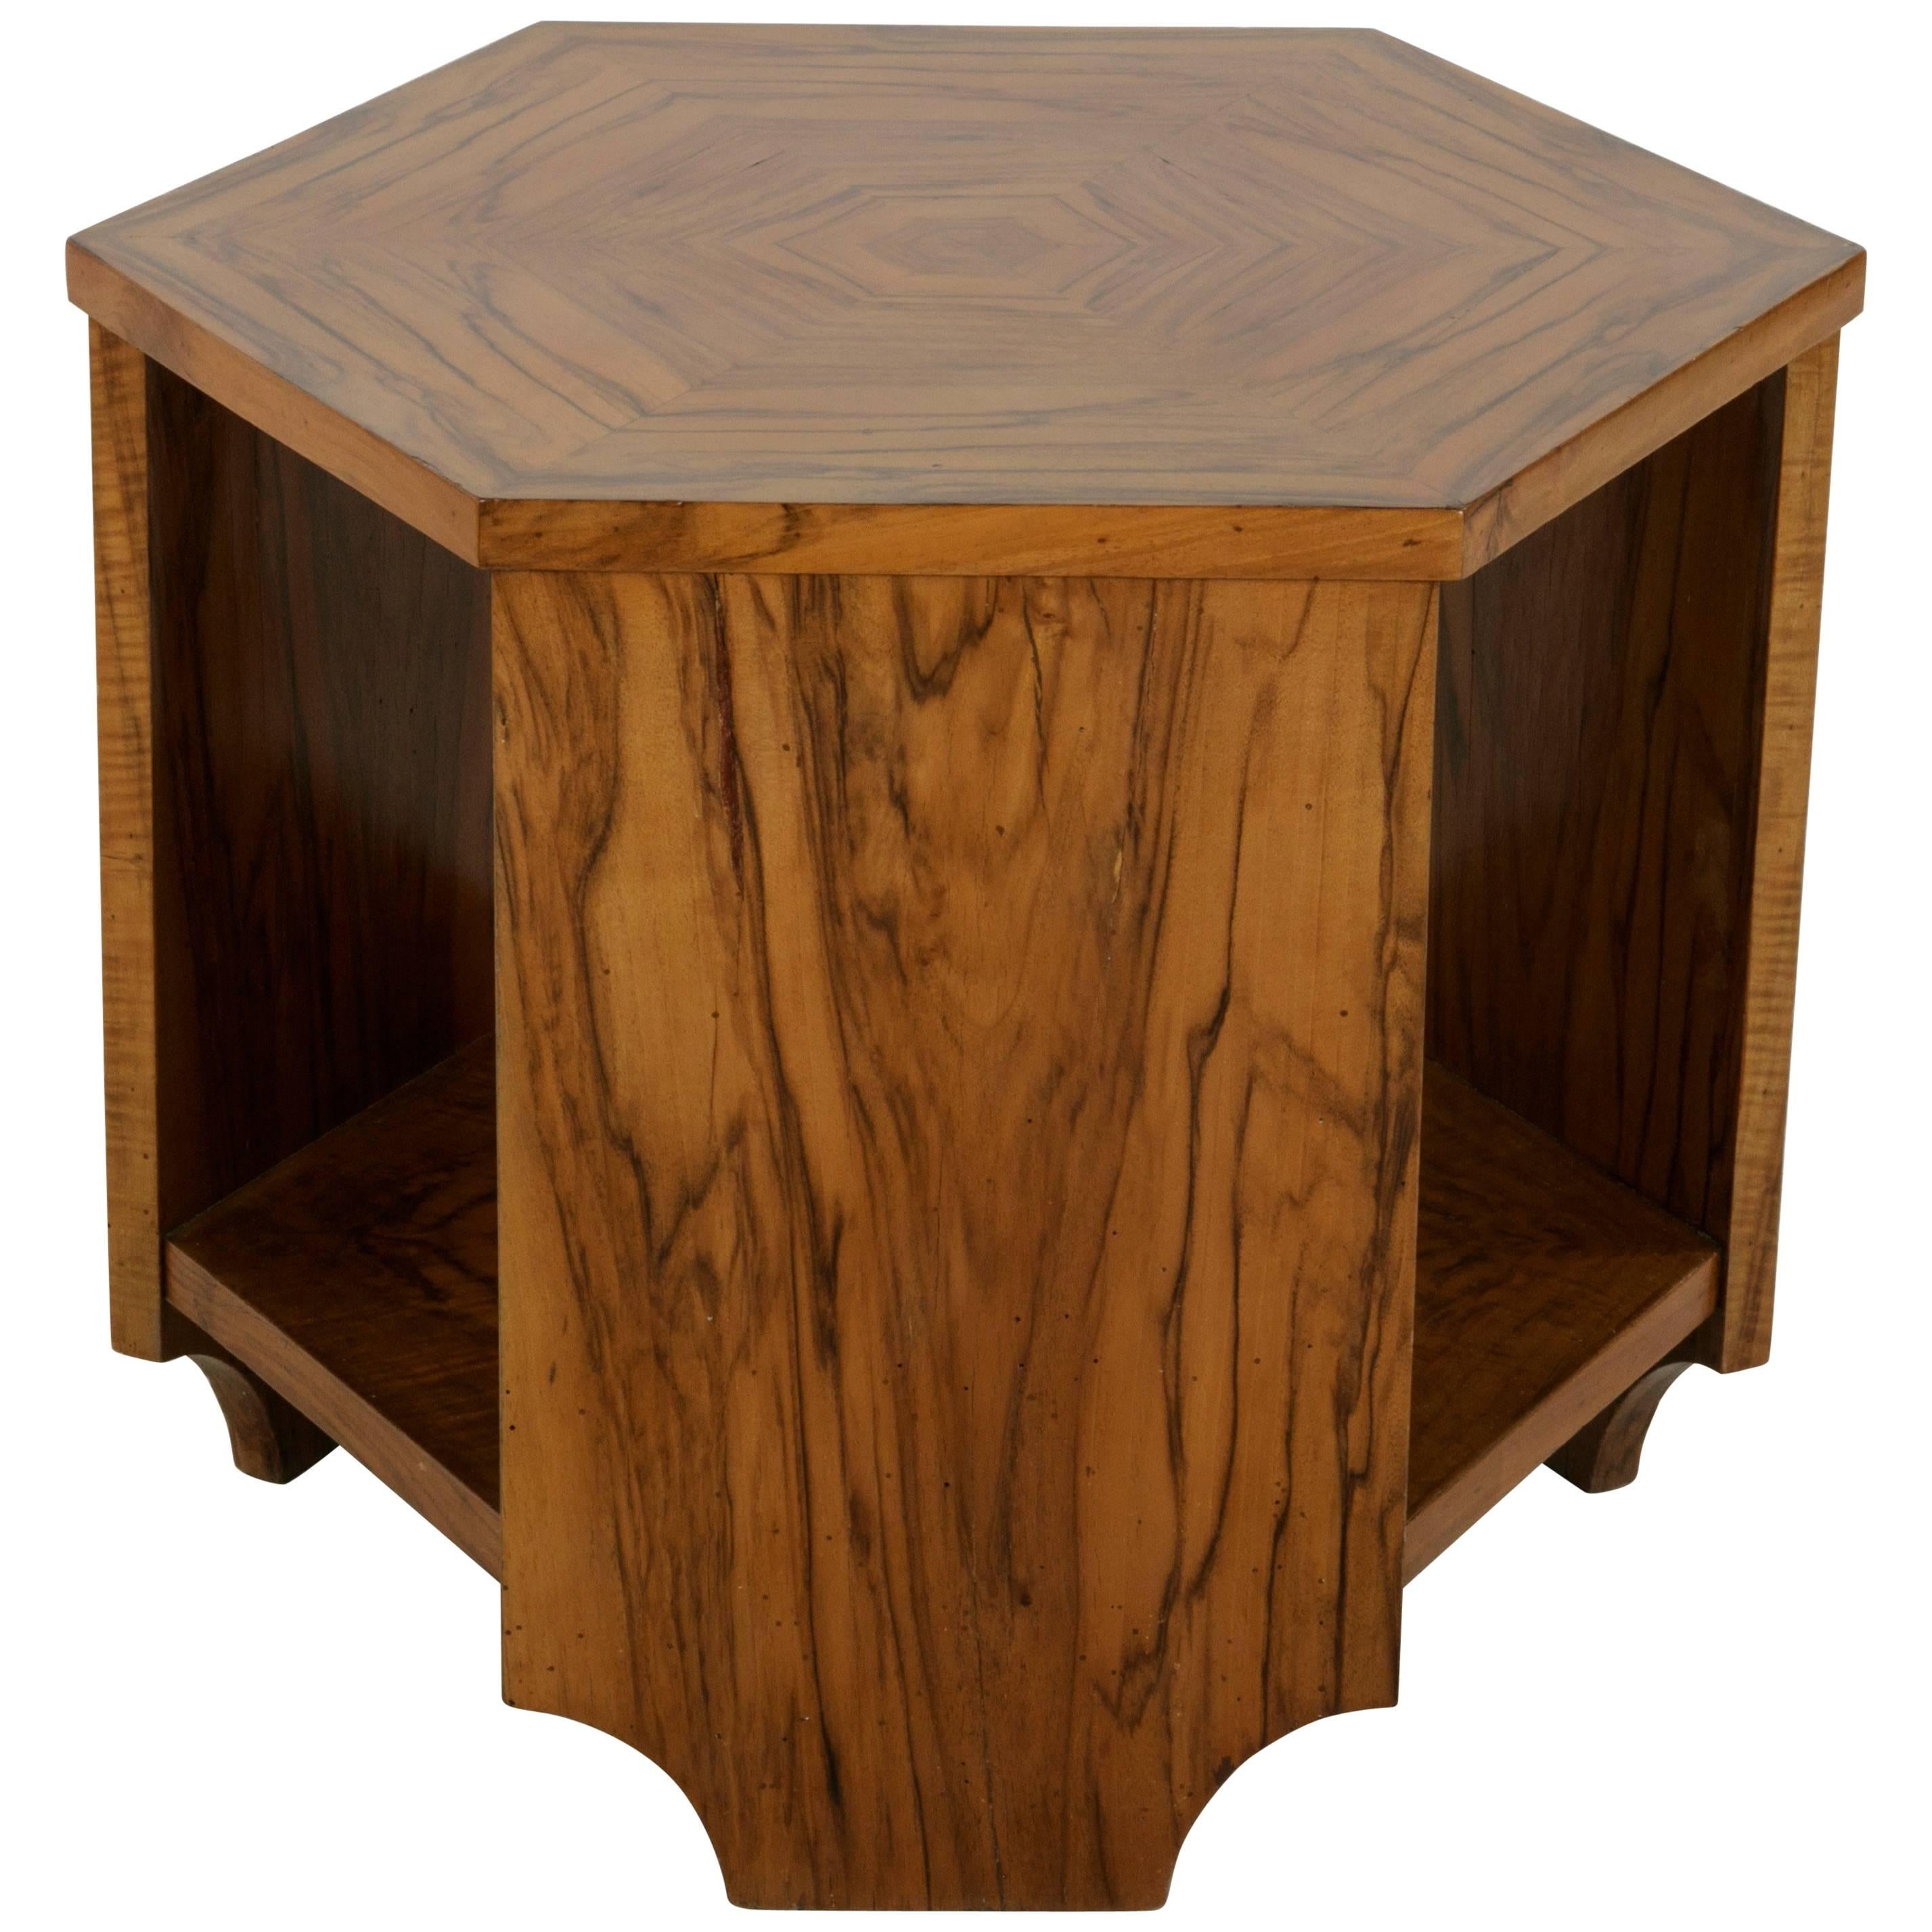 Early 20th Century French Art Deco Period Bookmatched Walnut Hexagon Side Table